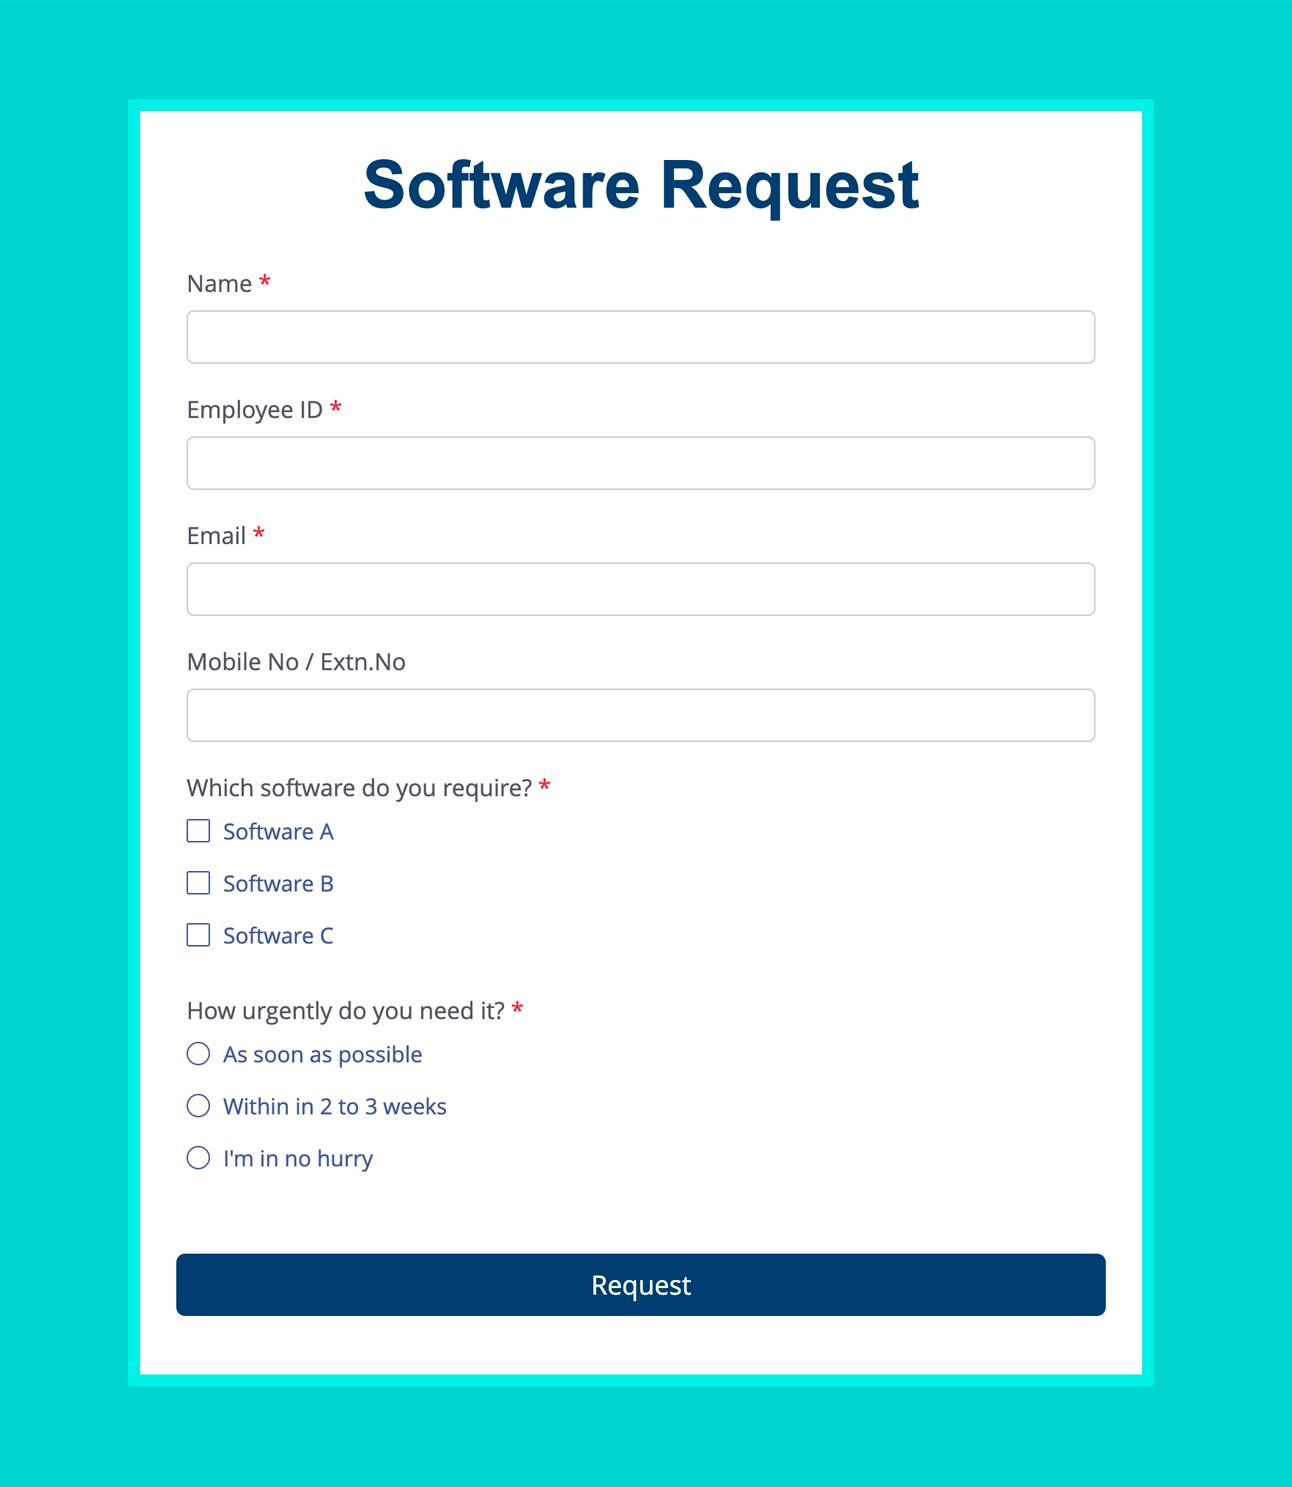 Free Contact Form Generator  Contact Us Forms Builder – Zoho Forms